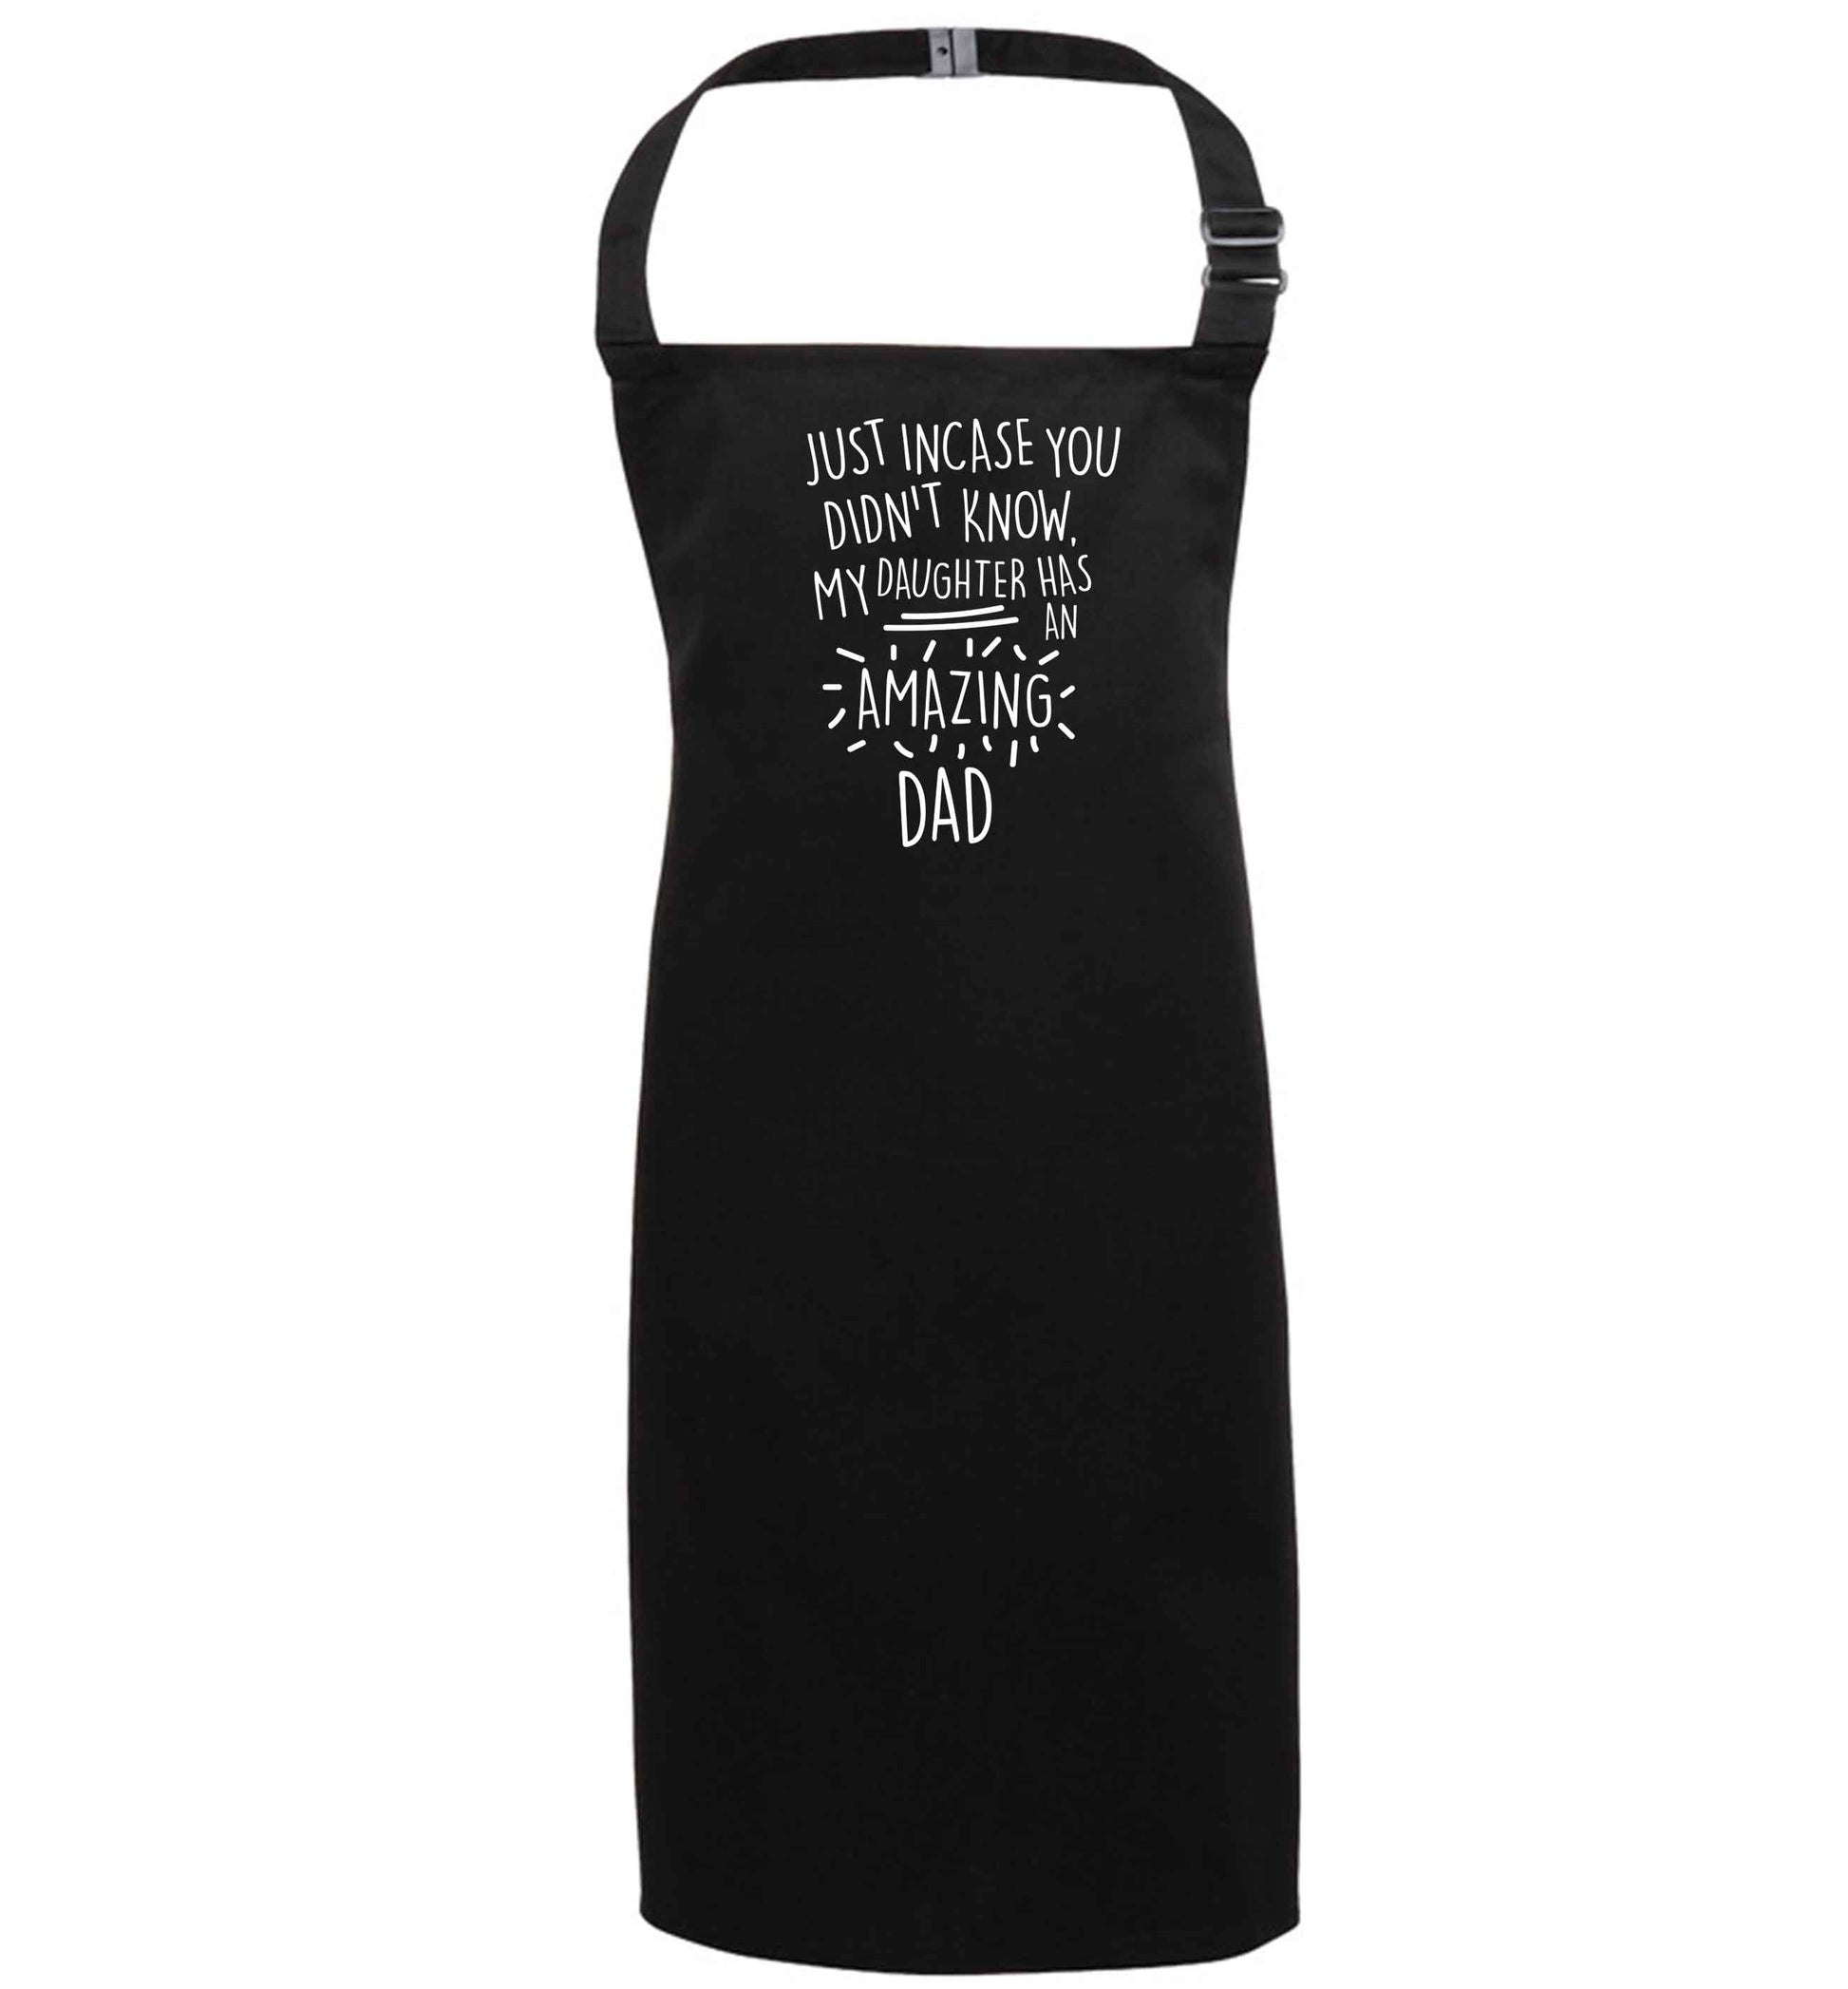 Just incase you didn't know my daughter has an amazing dad black apron 7-10 years